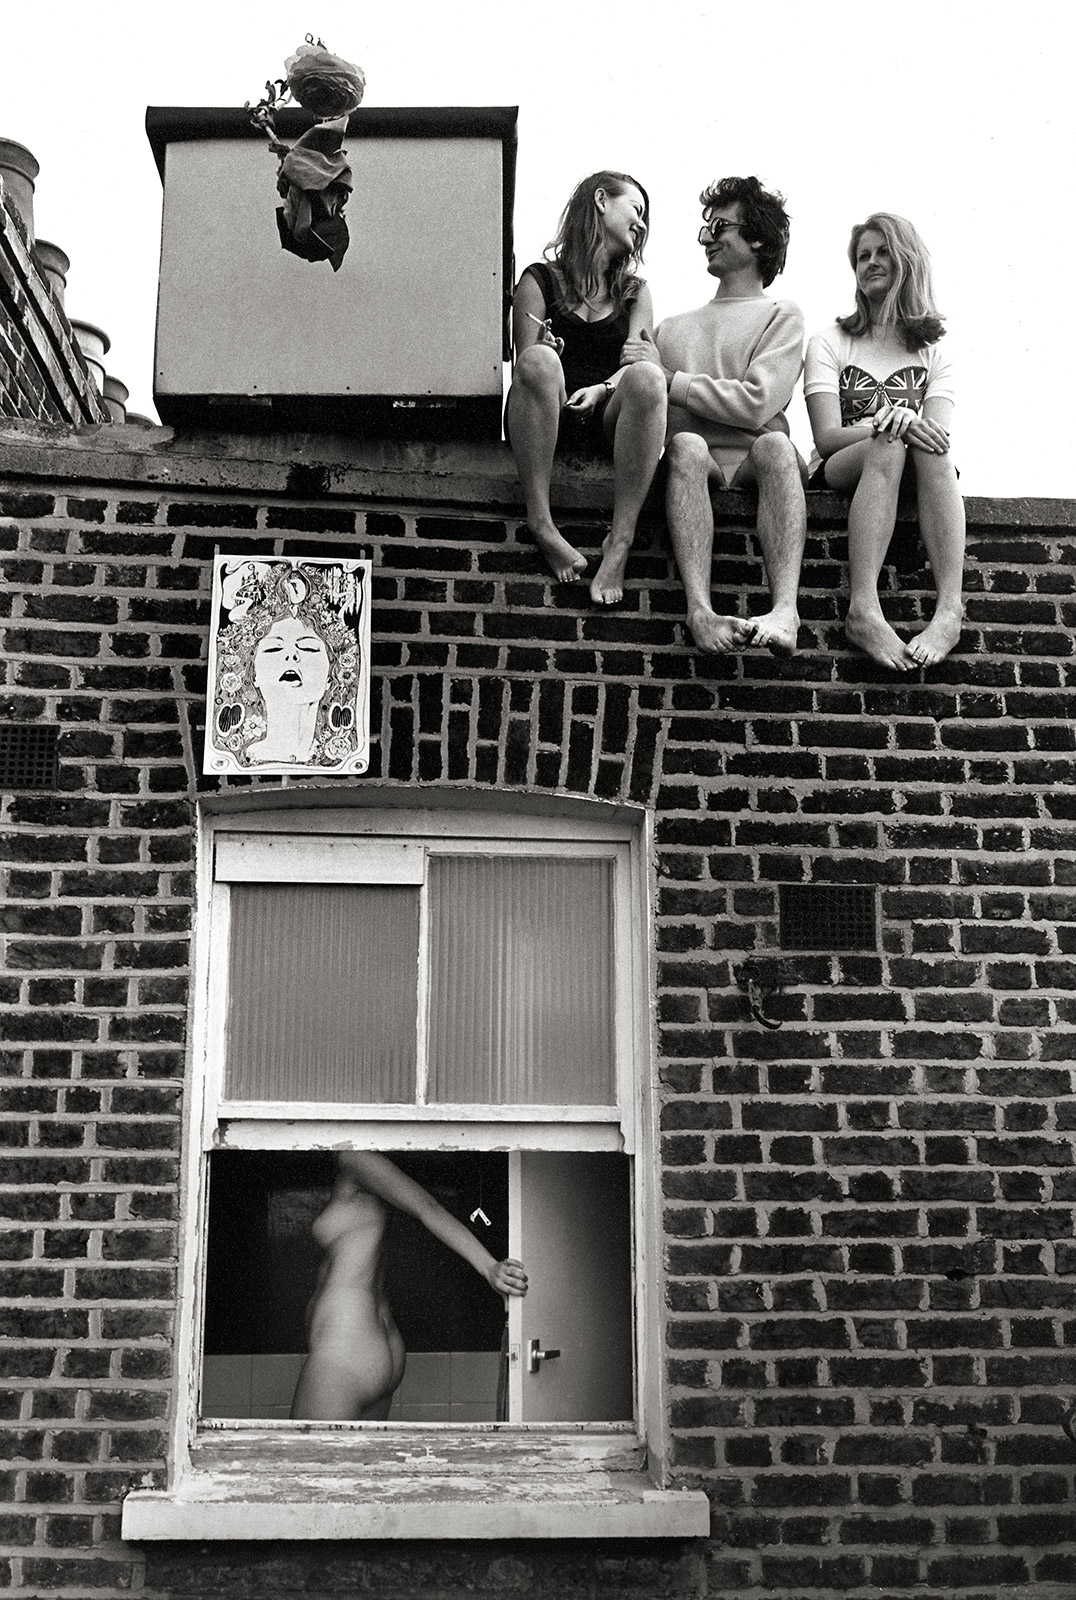 German photographer Frank Habicht’s fifth-floor rooftop in London’s SW5 district served as his “favorite open-air studio” and “was a melting place for exuberant parties on mild summer nights,” he writes in his book. 